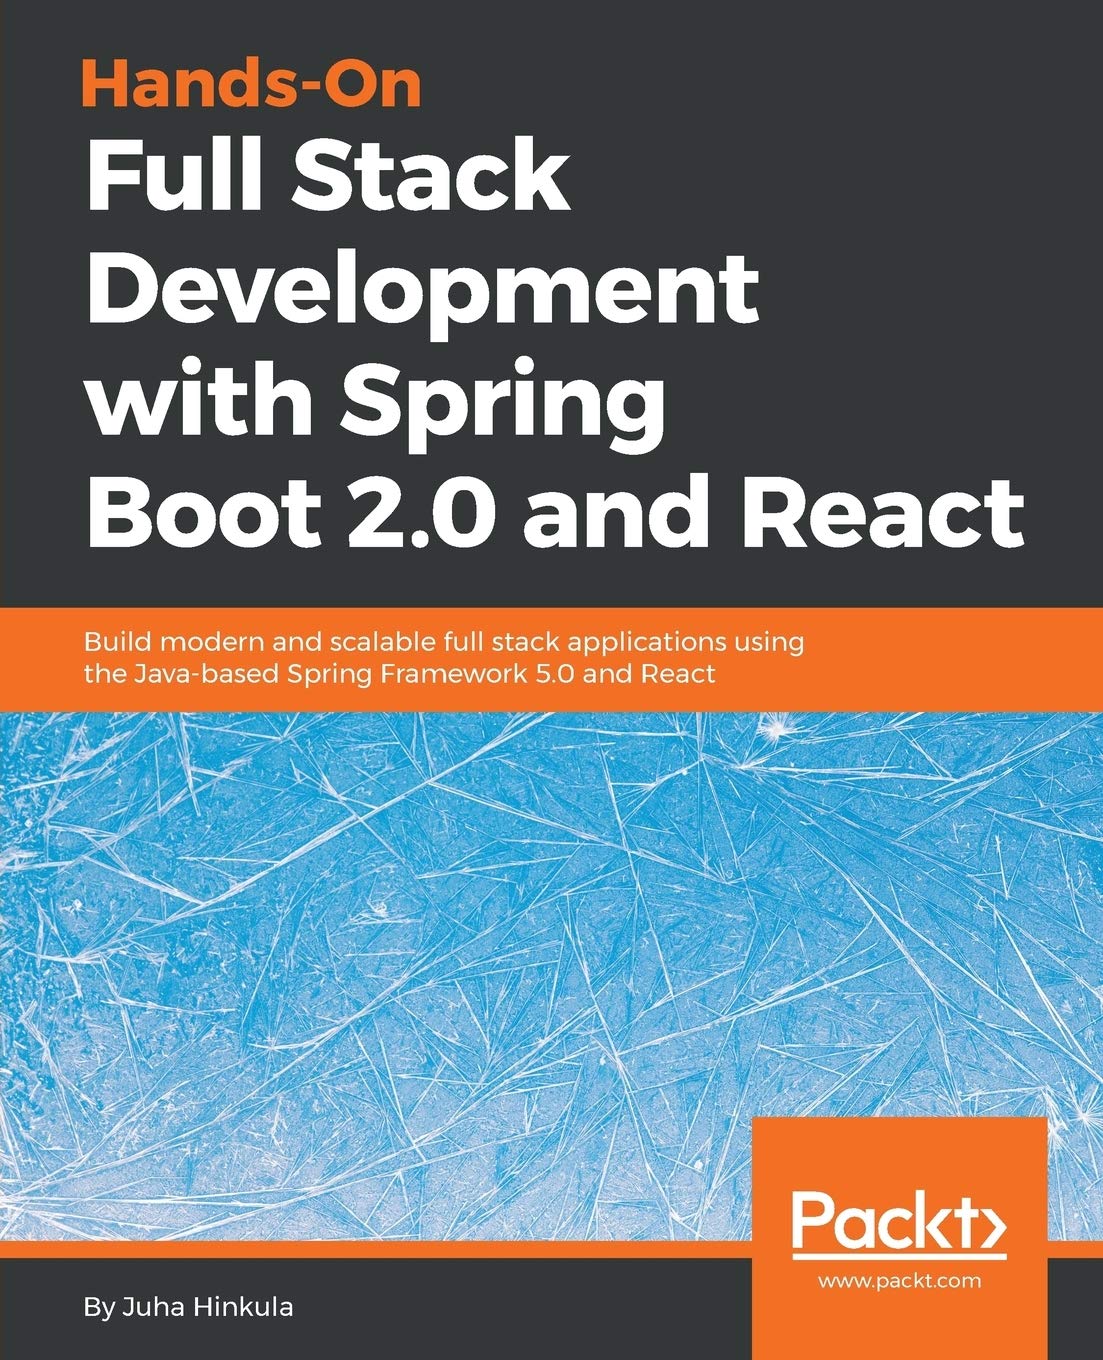 Book Cover Hands-On Full Stack Development with Spring Boot 2.0 and React: Build modern and scalable full stack applications using the Java-based Spring Framework 5.0 and React